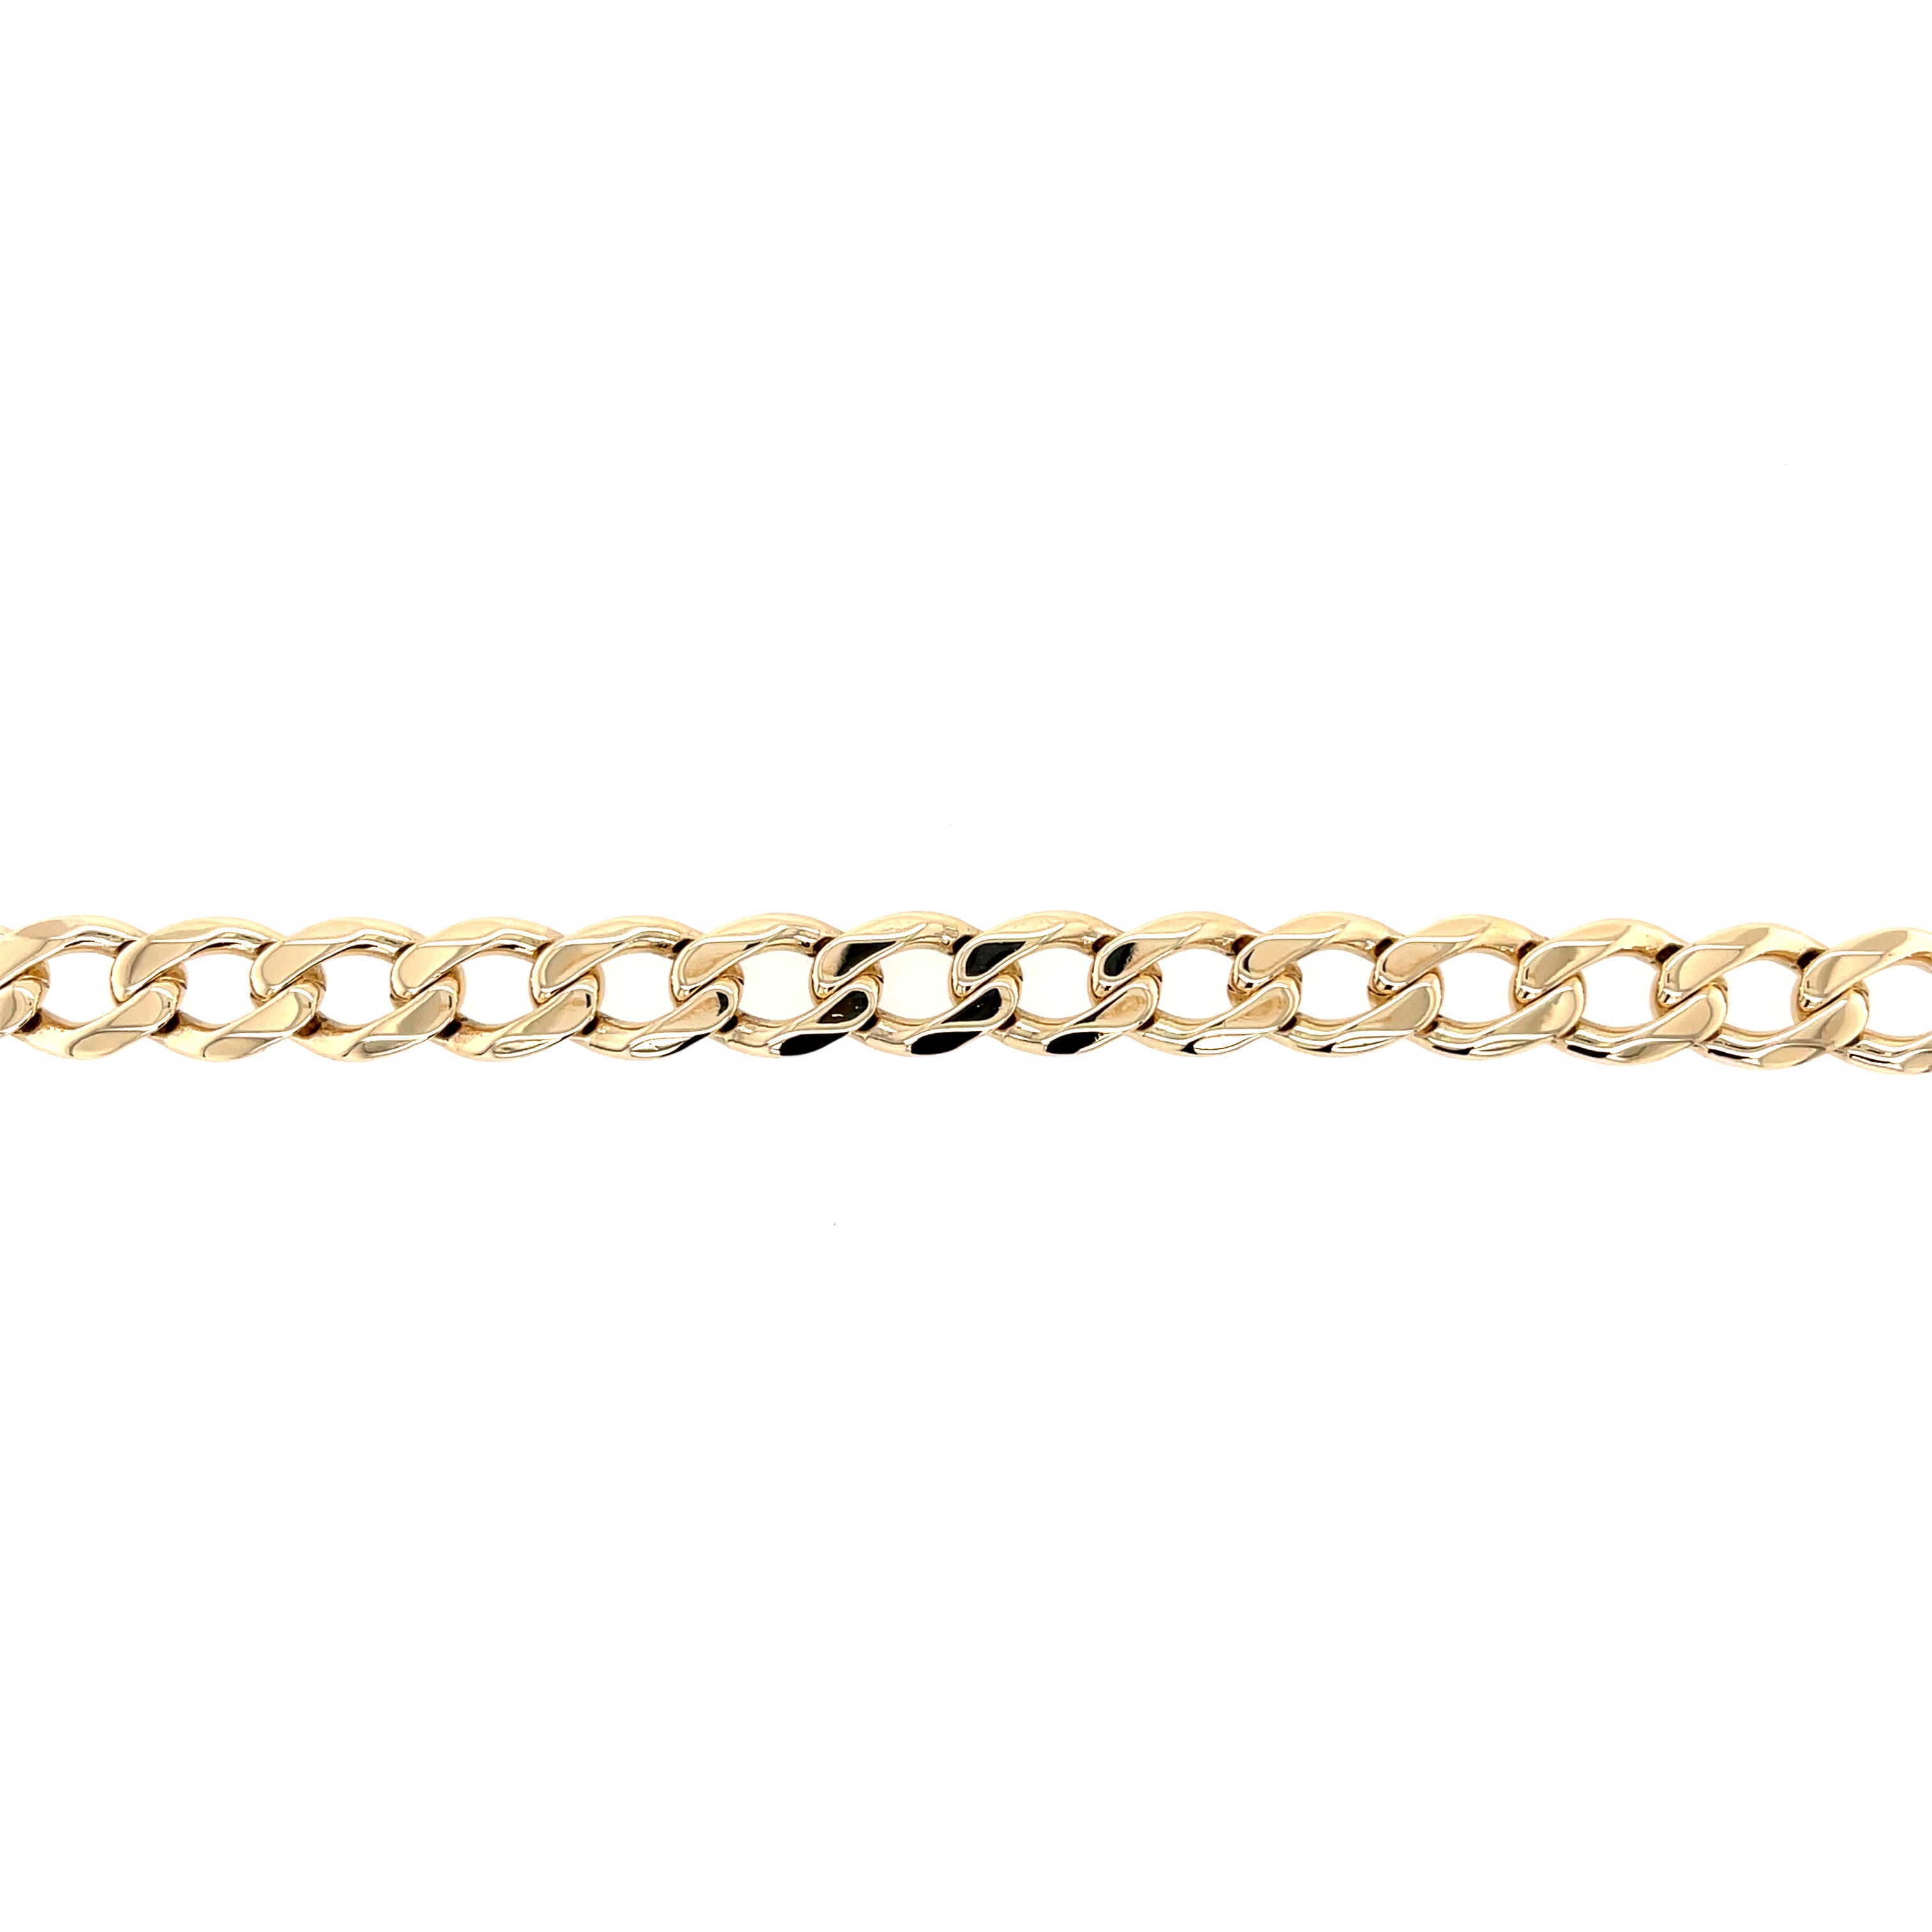 9ct Yellow Gold 9" Curb Link Bracelet - 25.05g SOLD